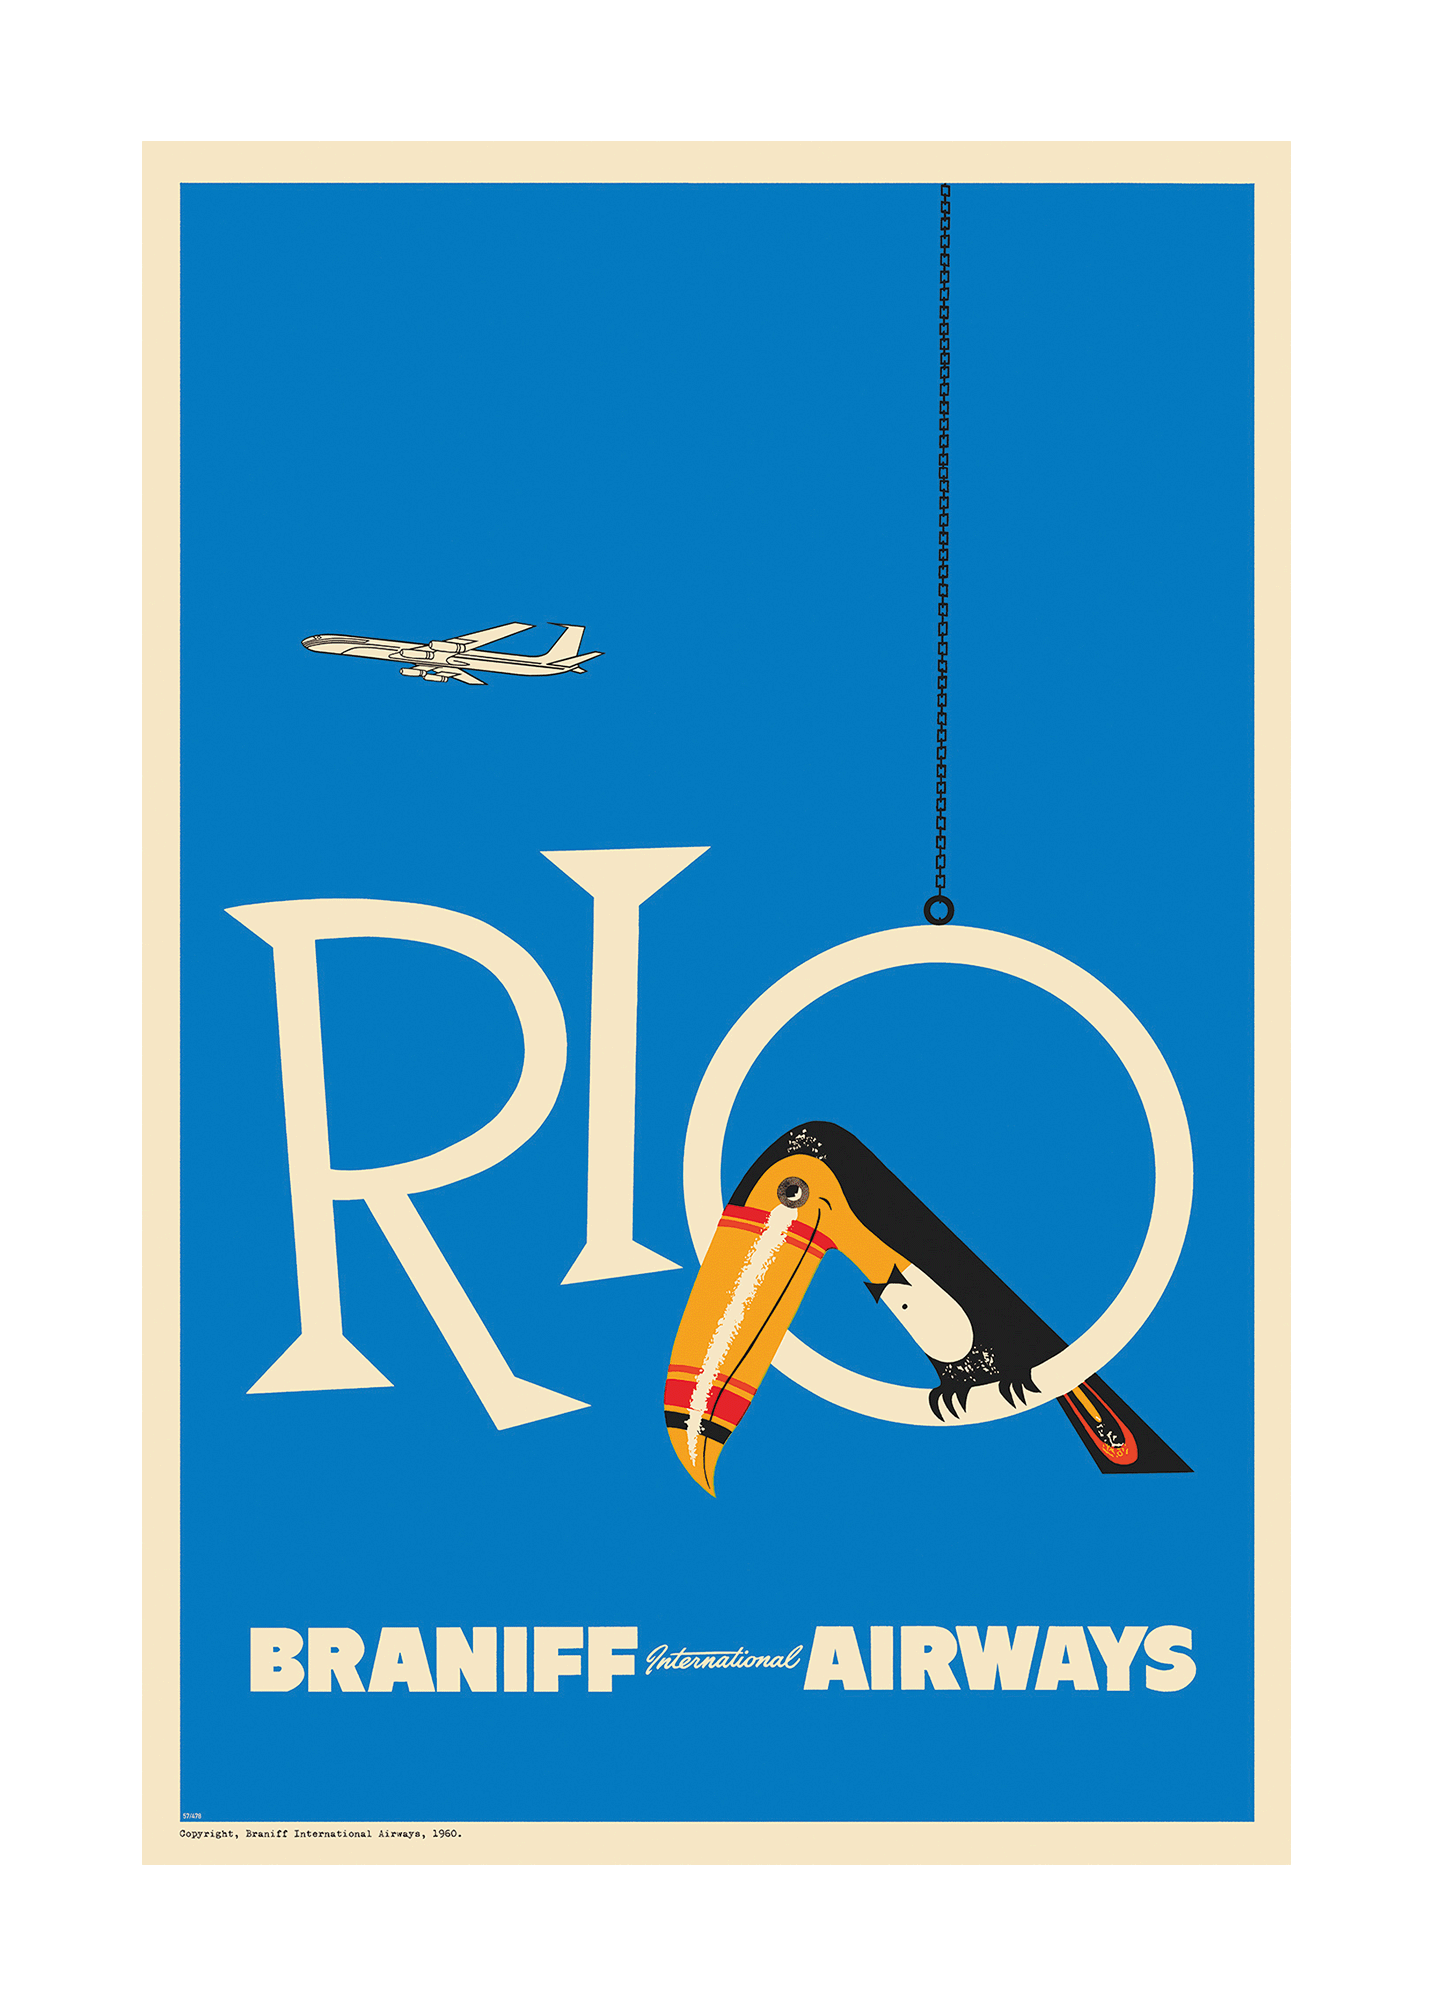 Braniff Rio Toucan Welcome to Brazil, 1959. (Azure Blue)